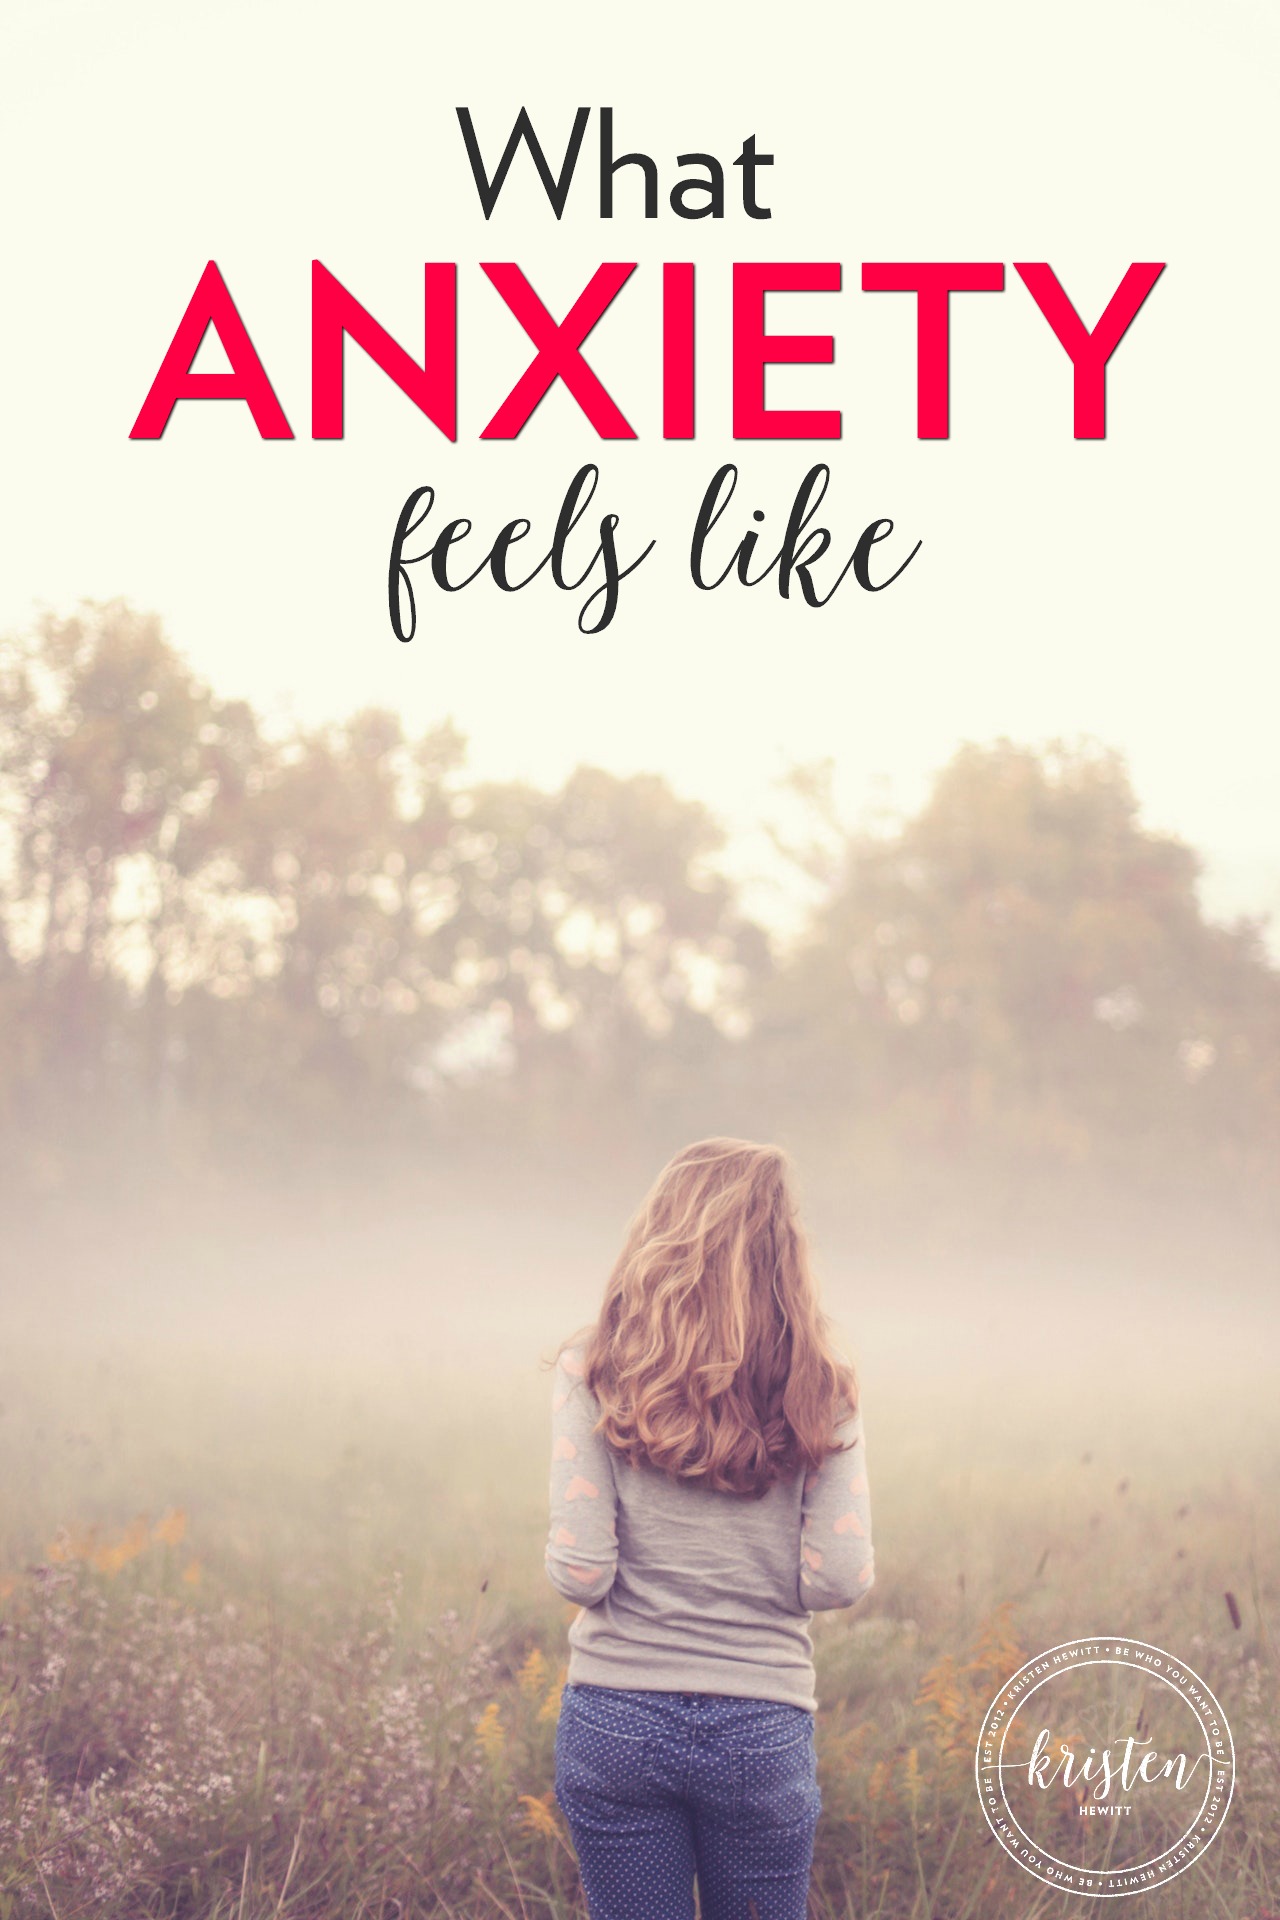 Anxiety comes in waves, it can escape you for awhile then show up when you least expect it. This is what anxiety feels like - you're not alone. 